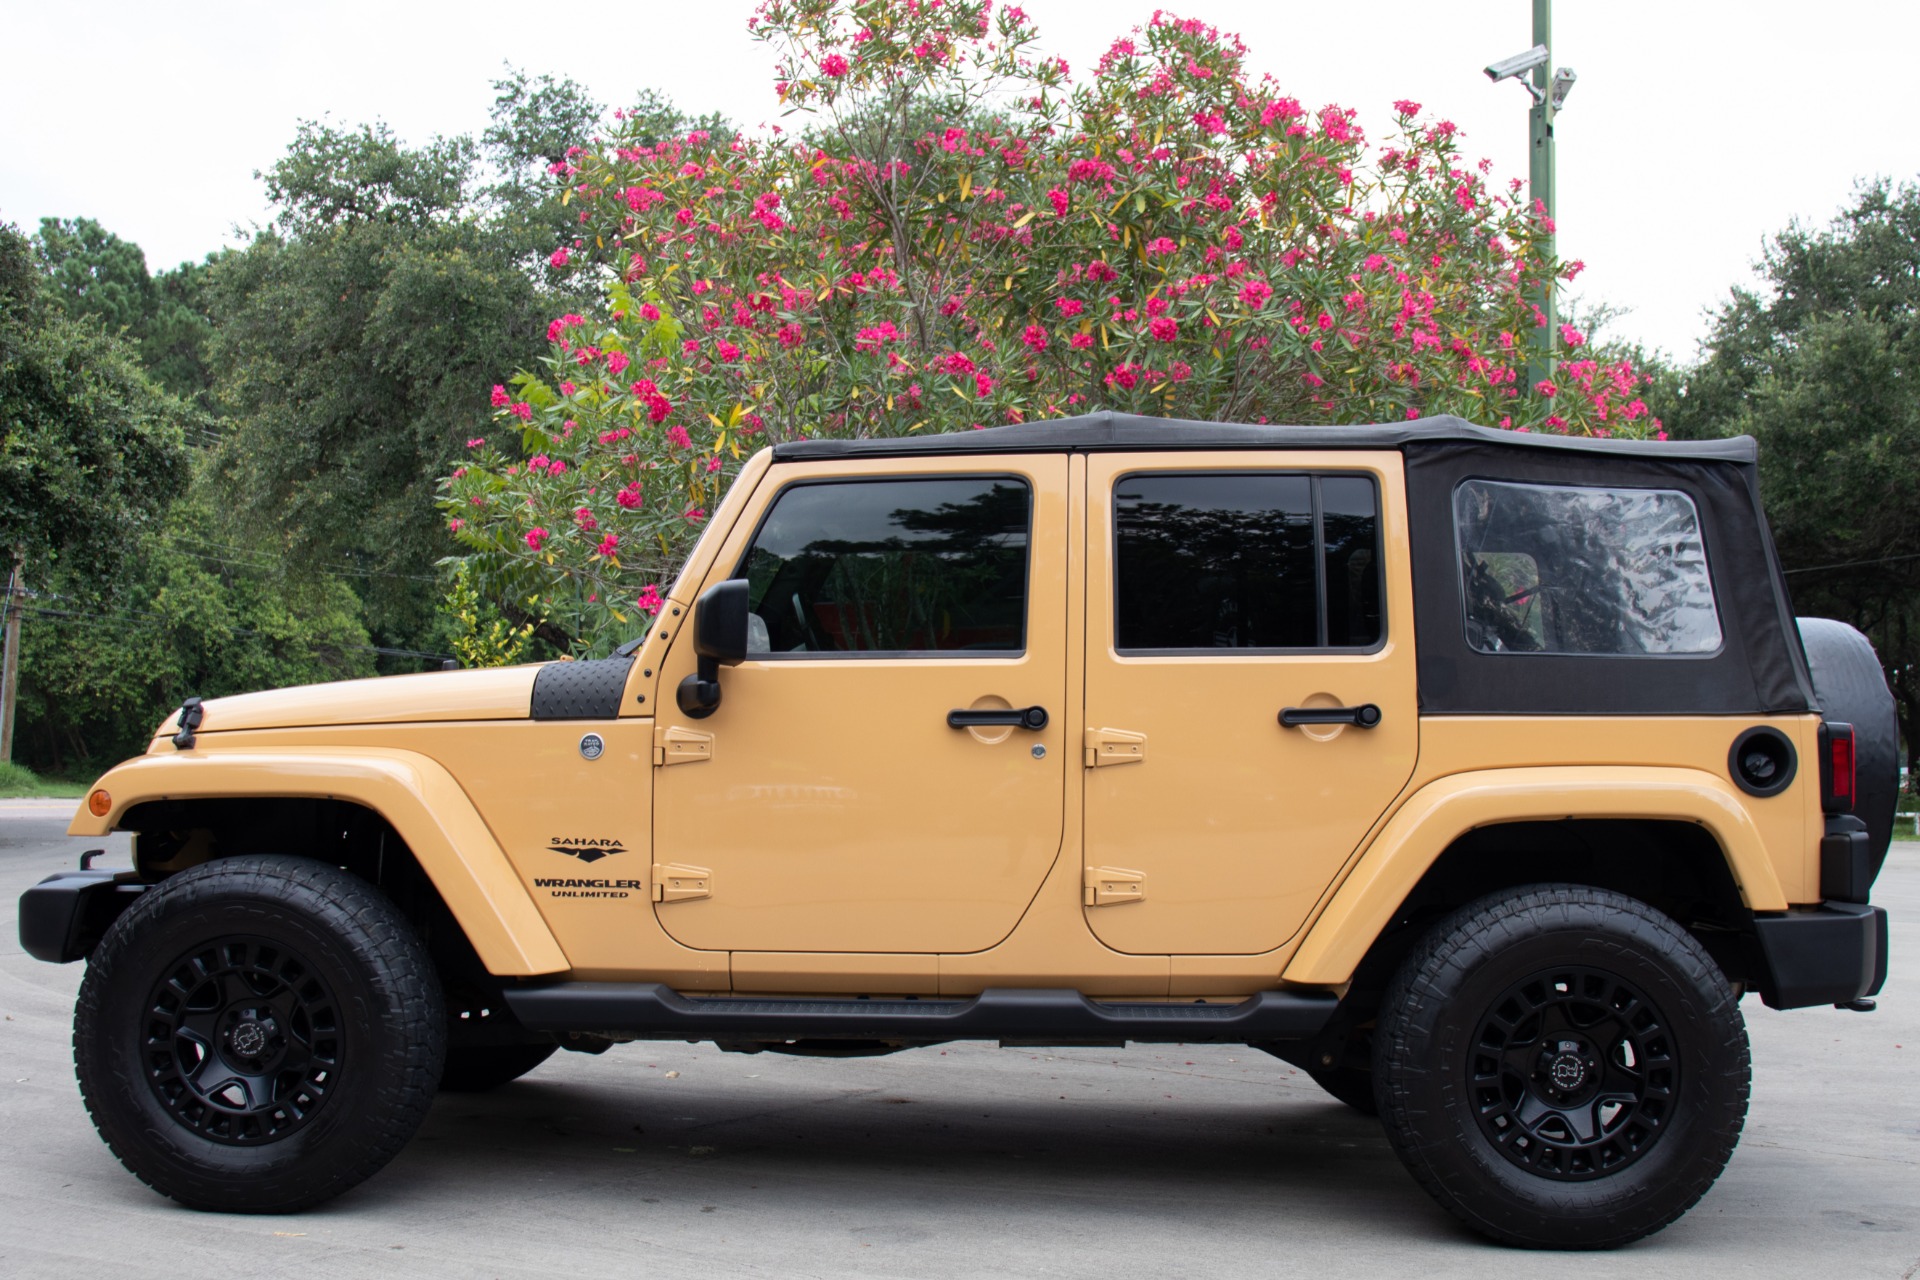 Used 2013 Jeep Wrangler Unlimited Sahara For Sale ($25,995) | Select Jeeps  Inc. Stock #627377